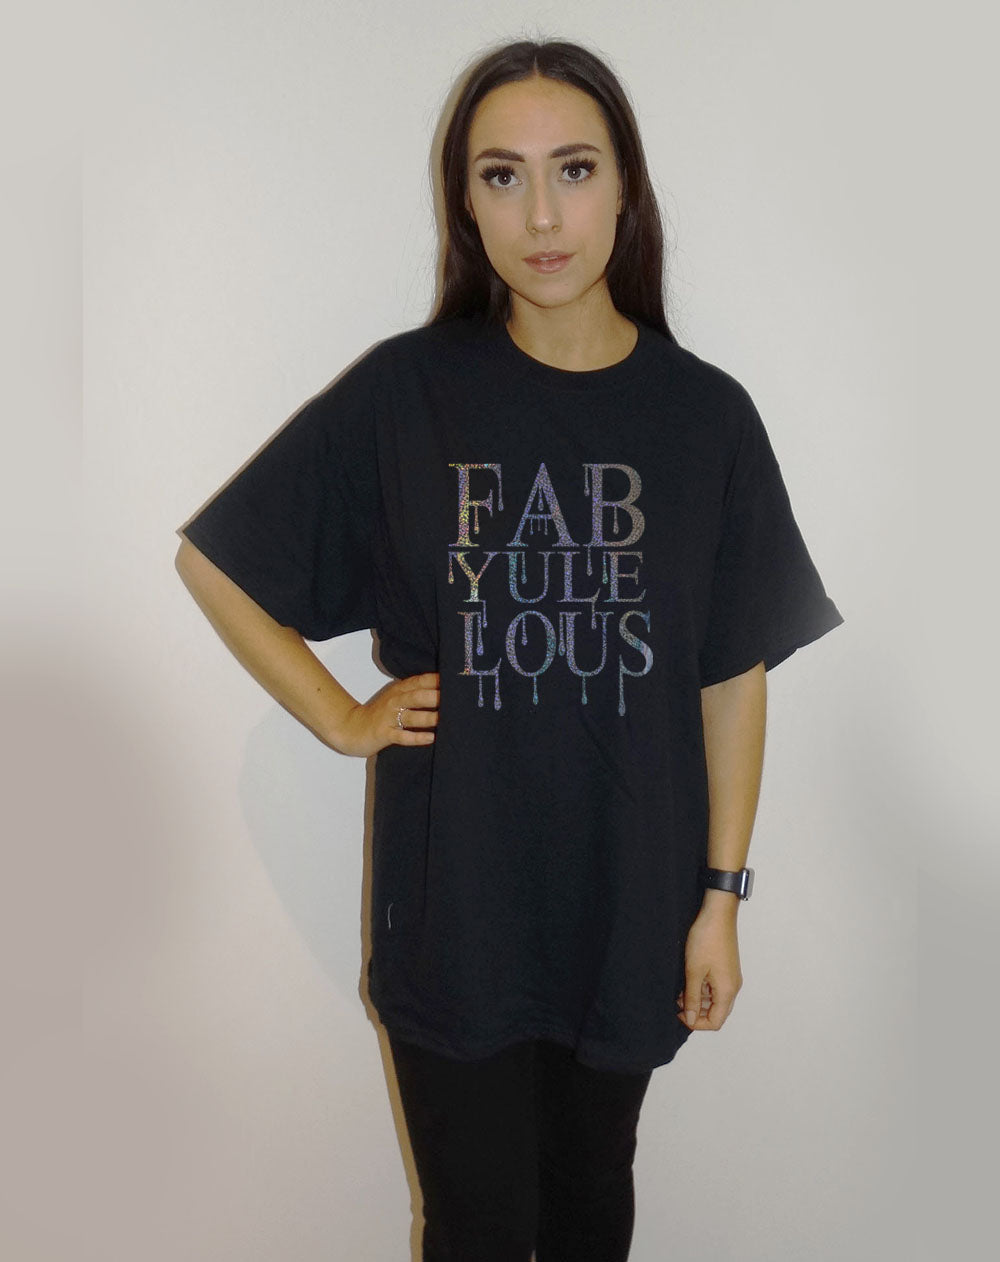 Black Christmas Tee With Fabyuleous icicles Graphic Print